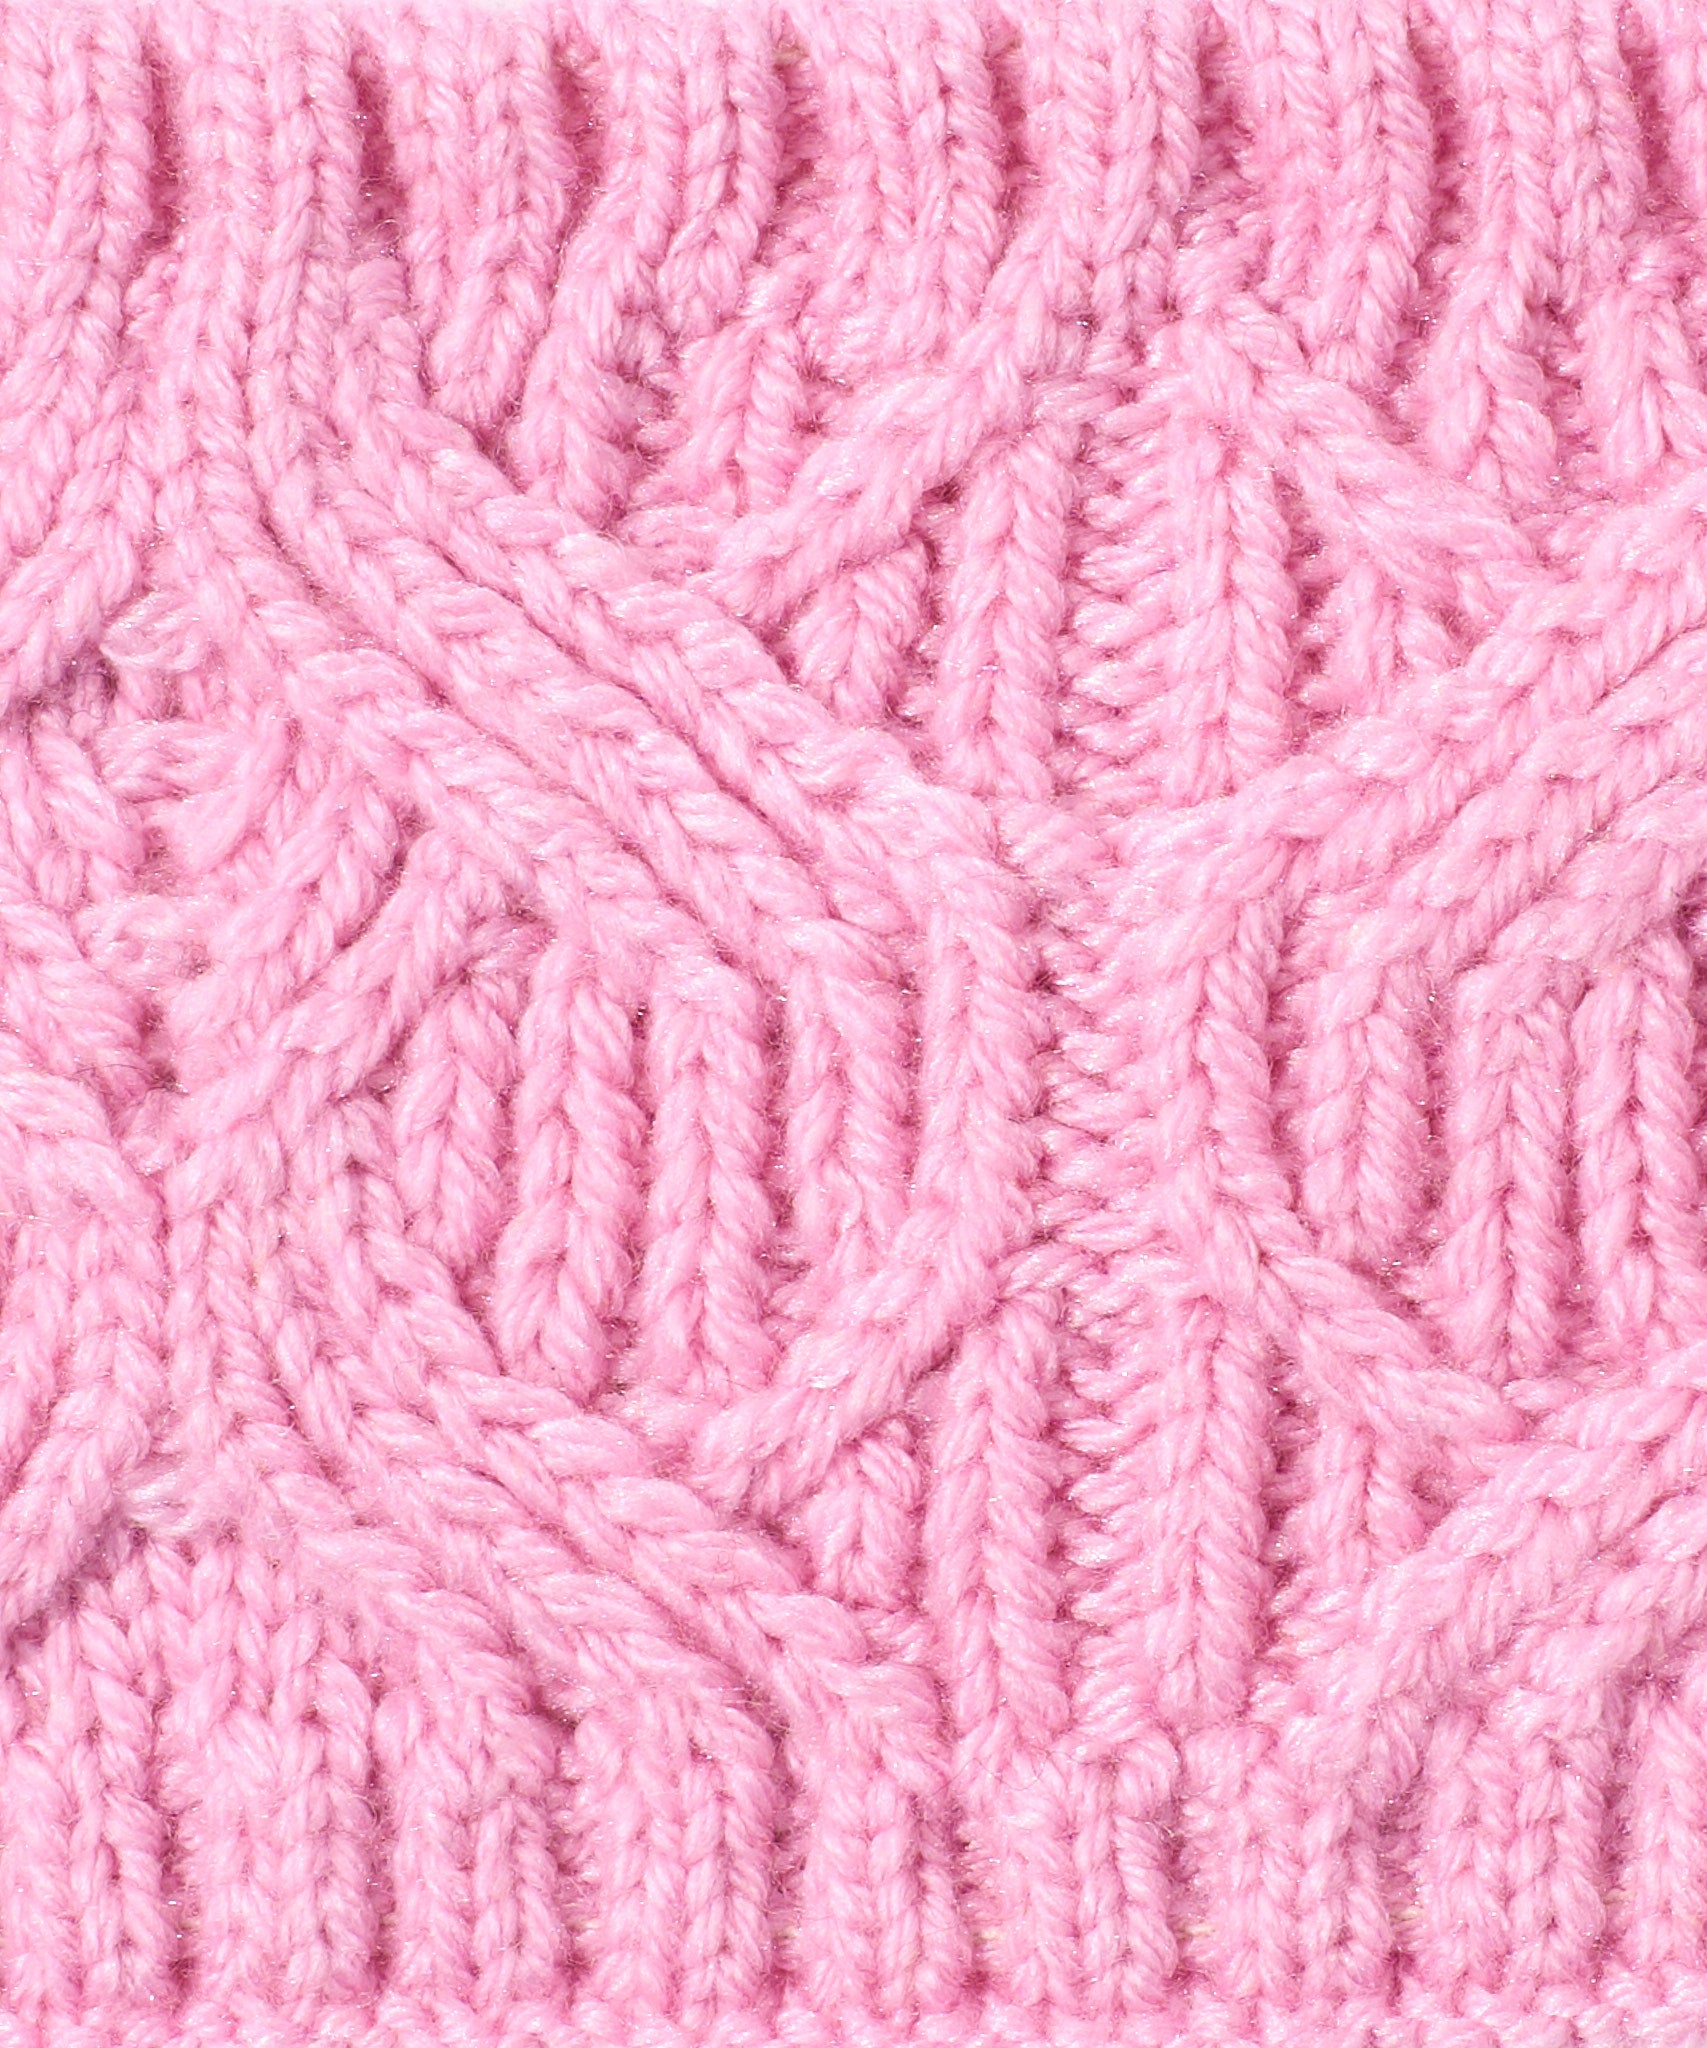 Loopy Cable Headband in color Candy Pink